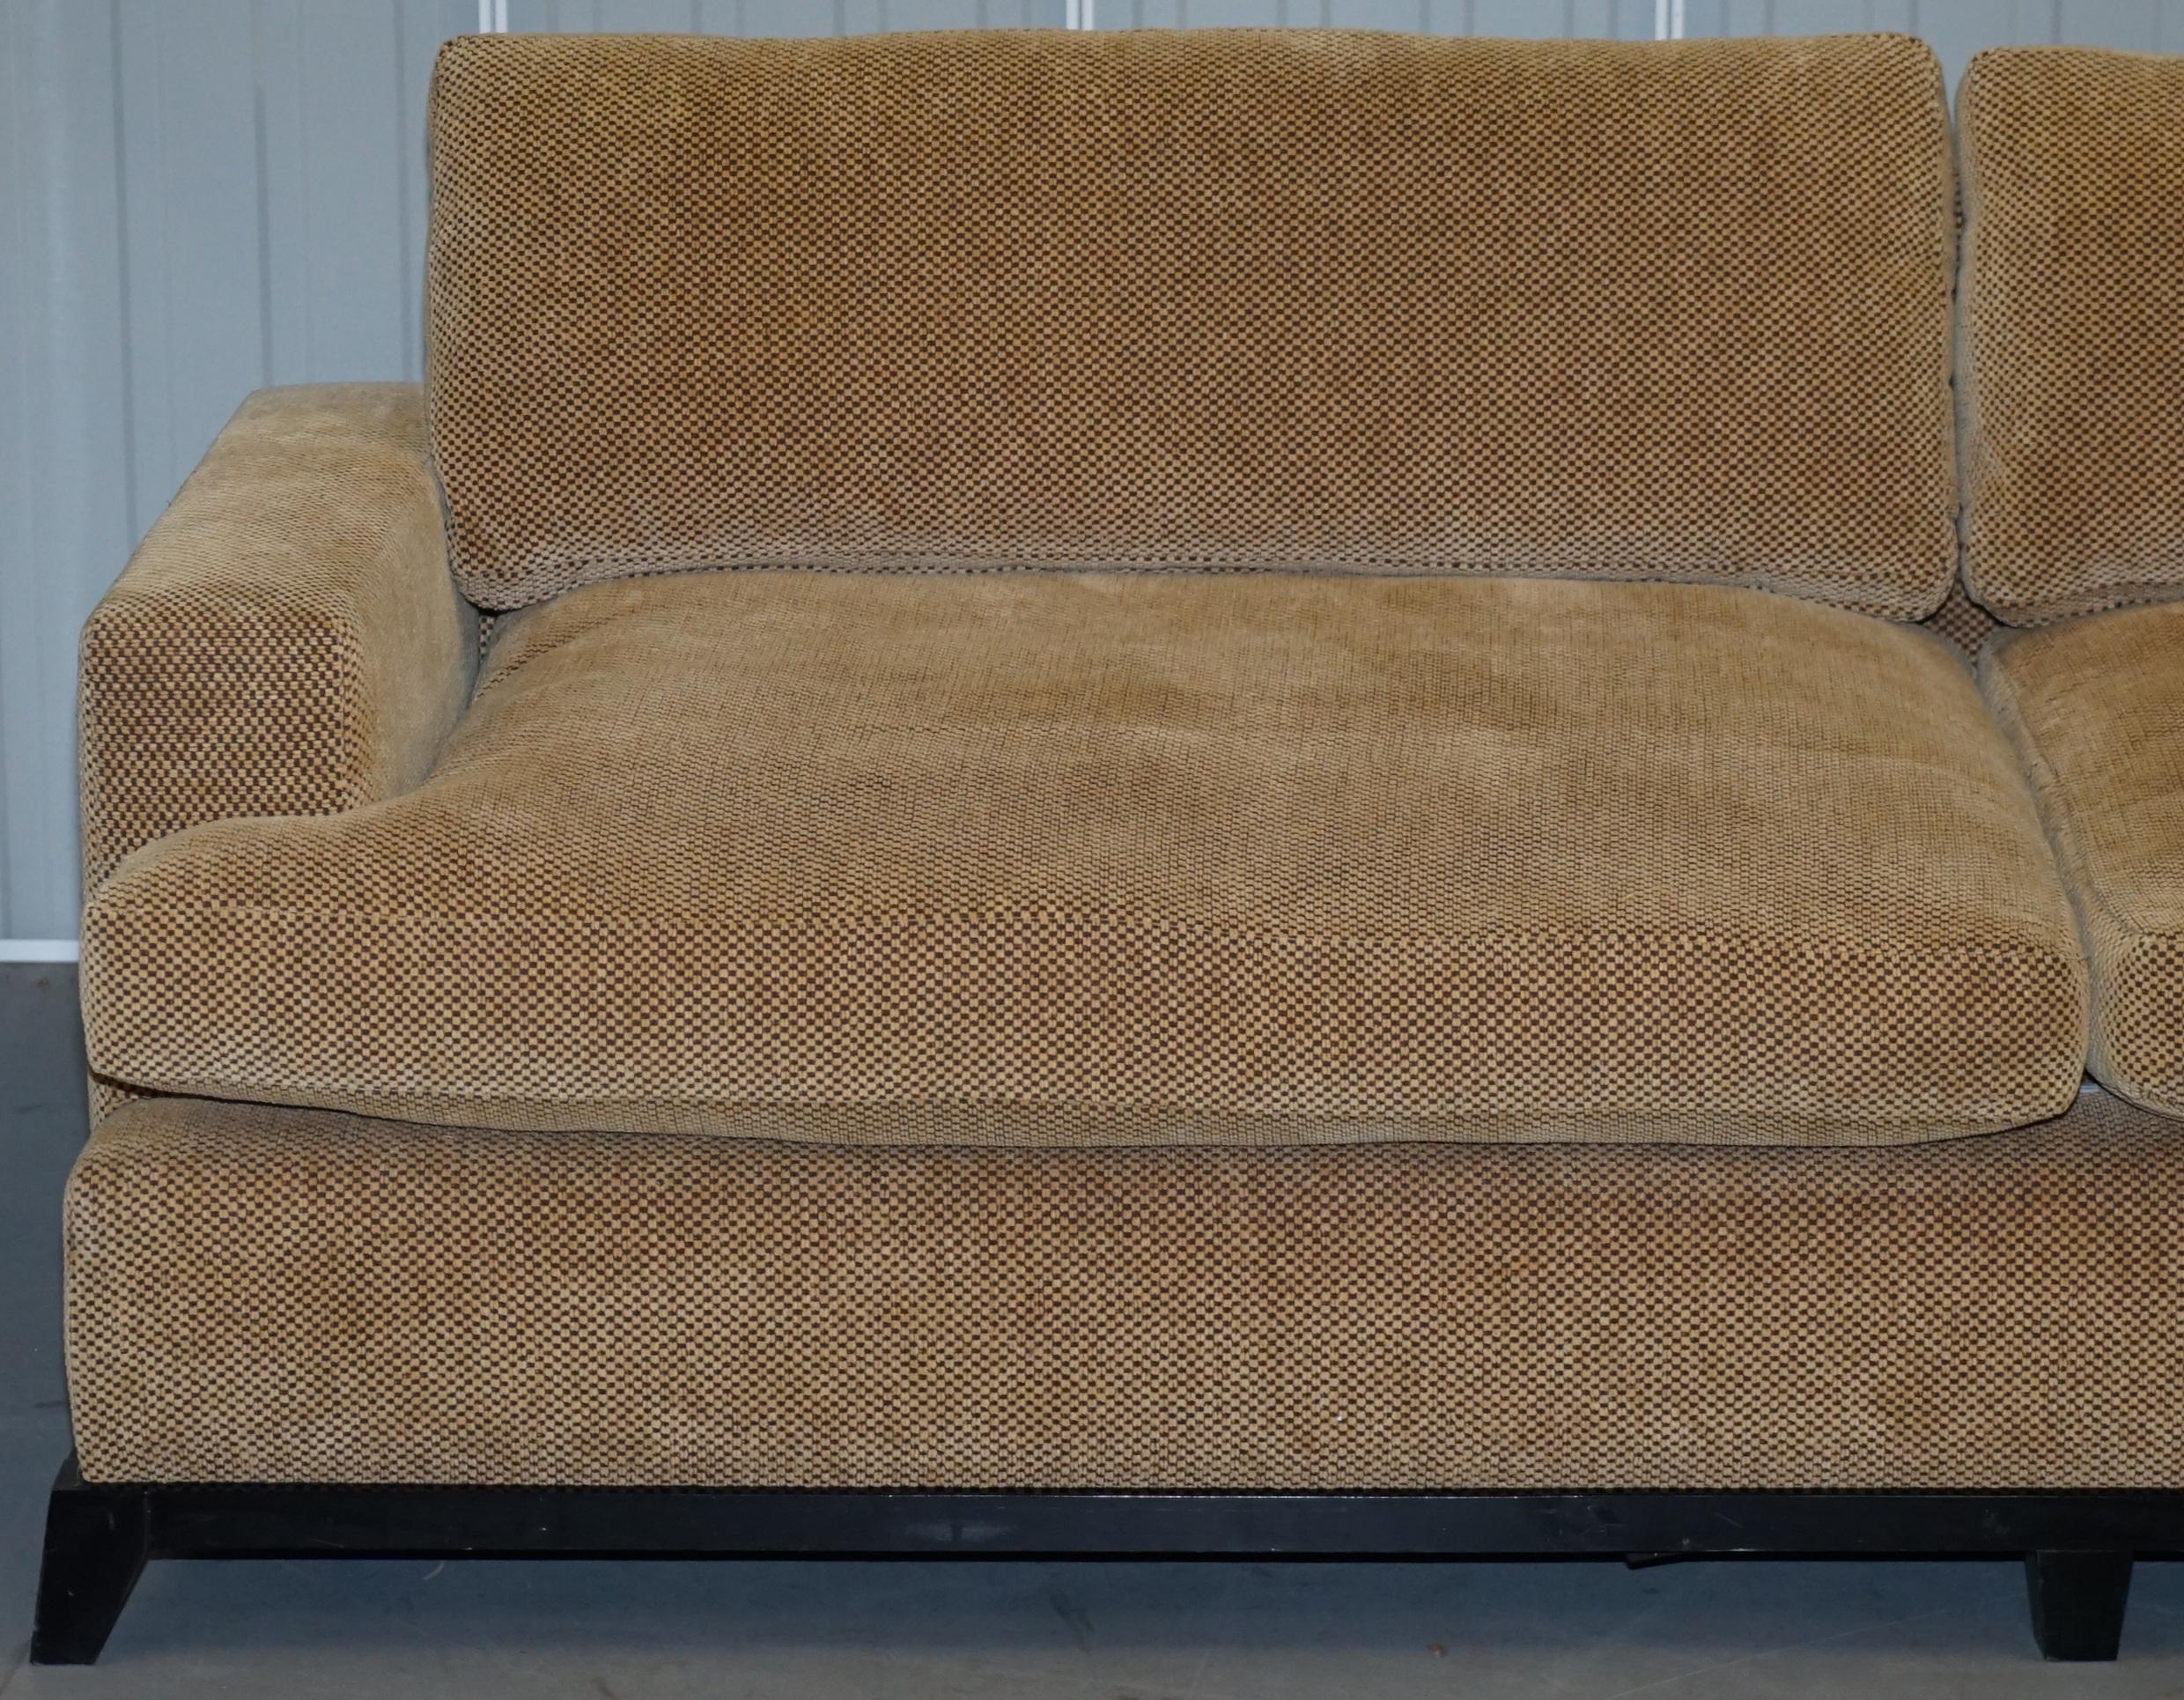 Art Deco 1 of 2 George Smith Signature Square Arm Sofa Feather Filled Cushions